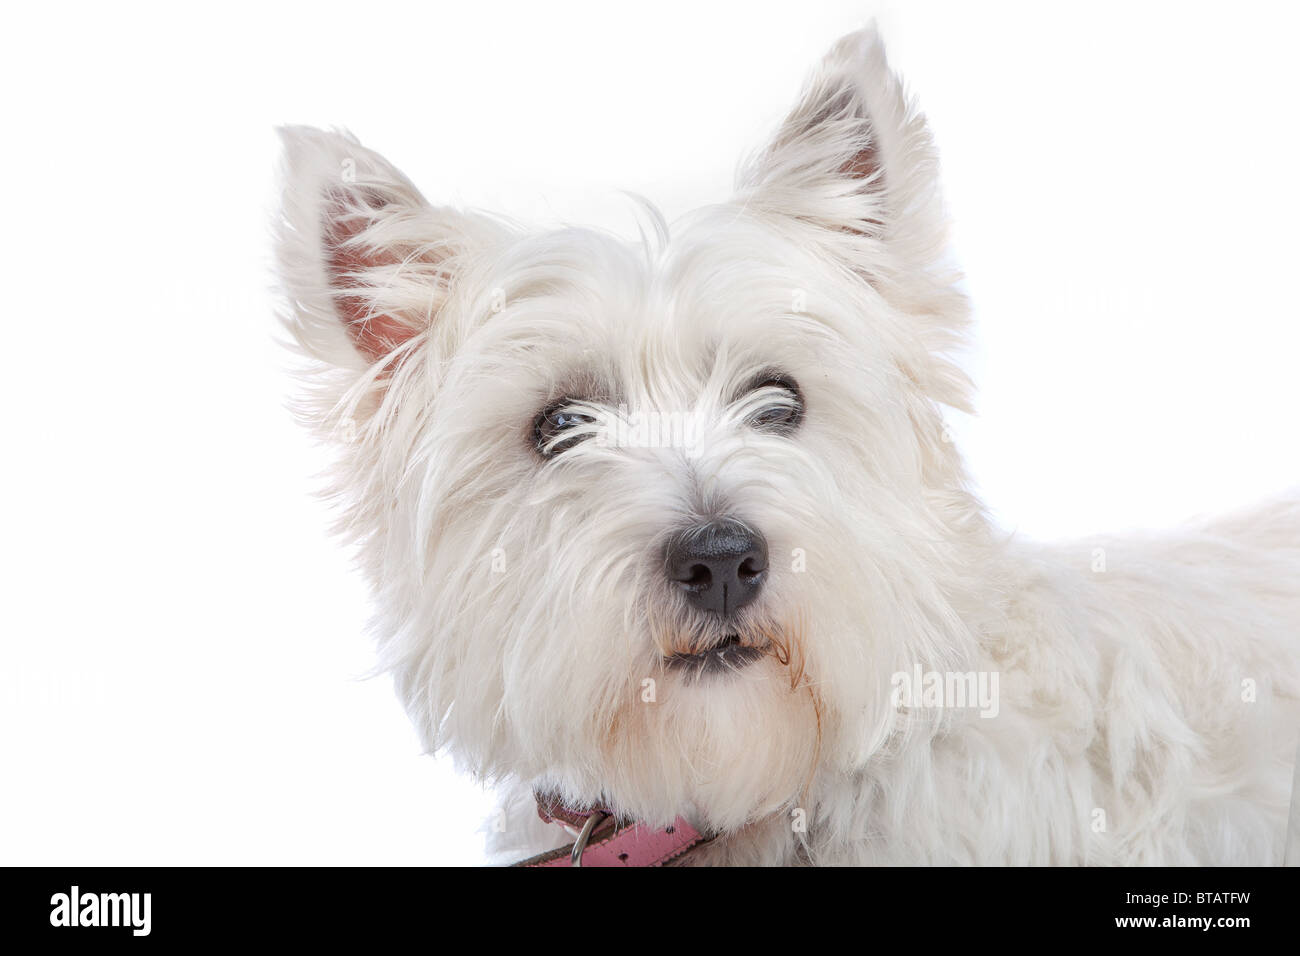 West Highland White Terrier isolated on white Banque D'Images